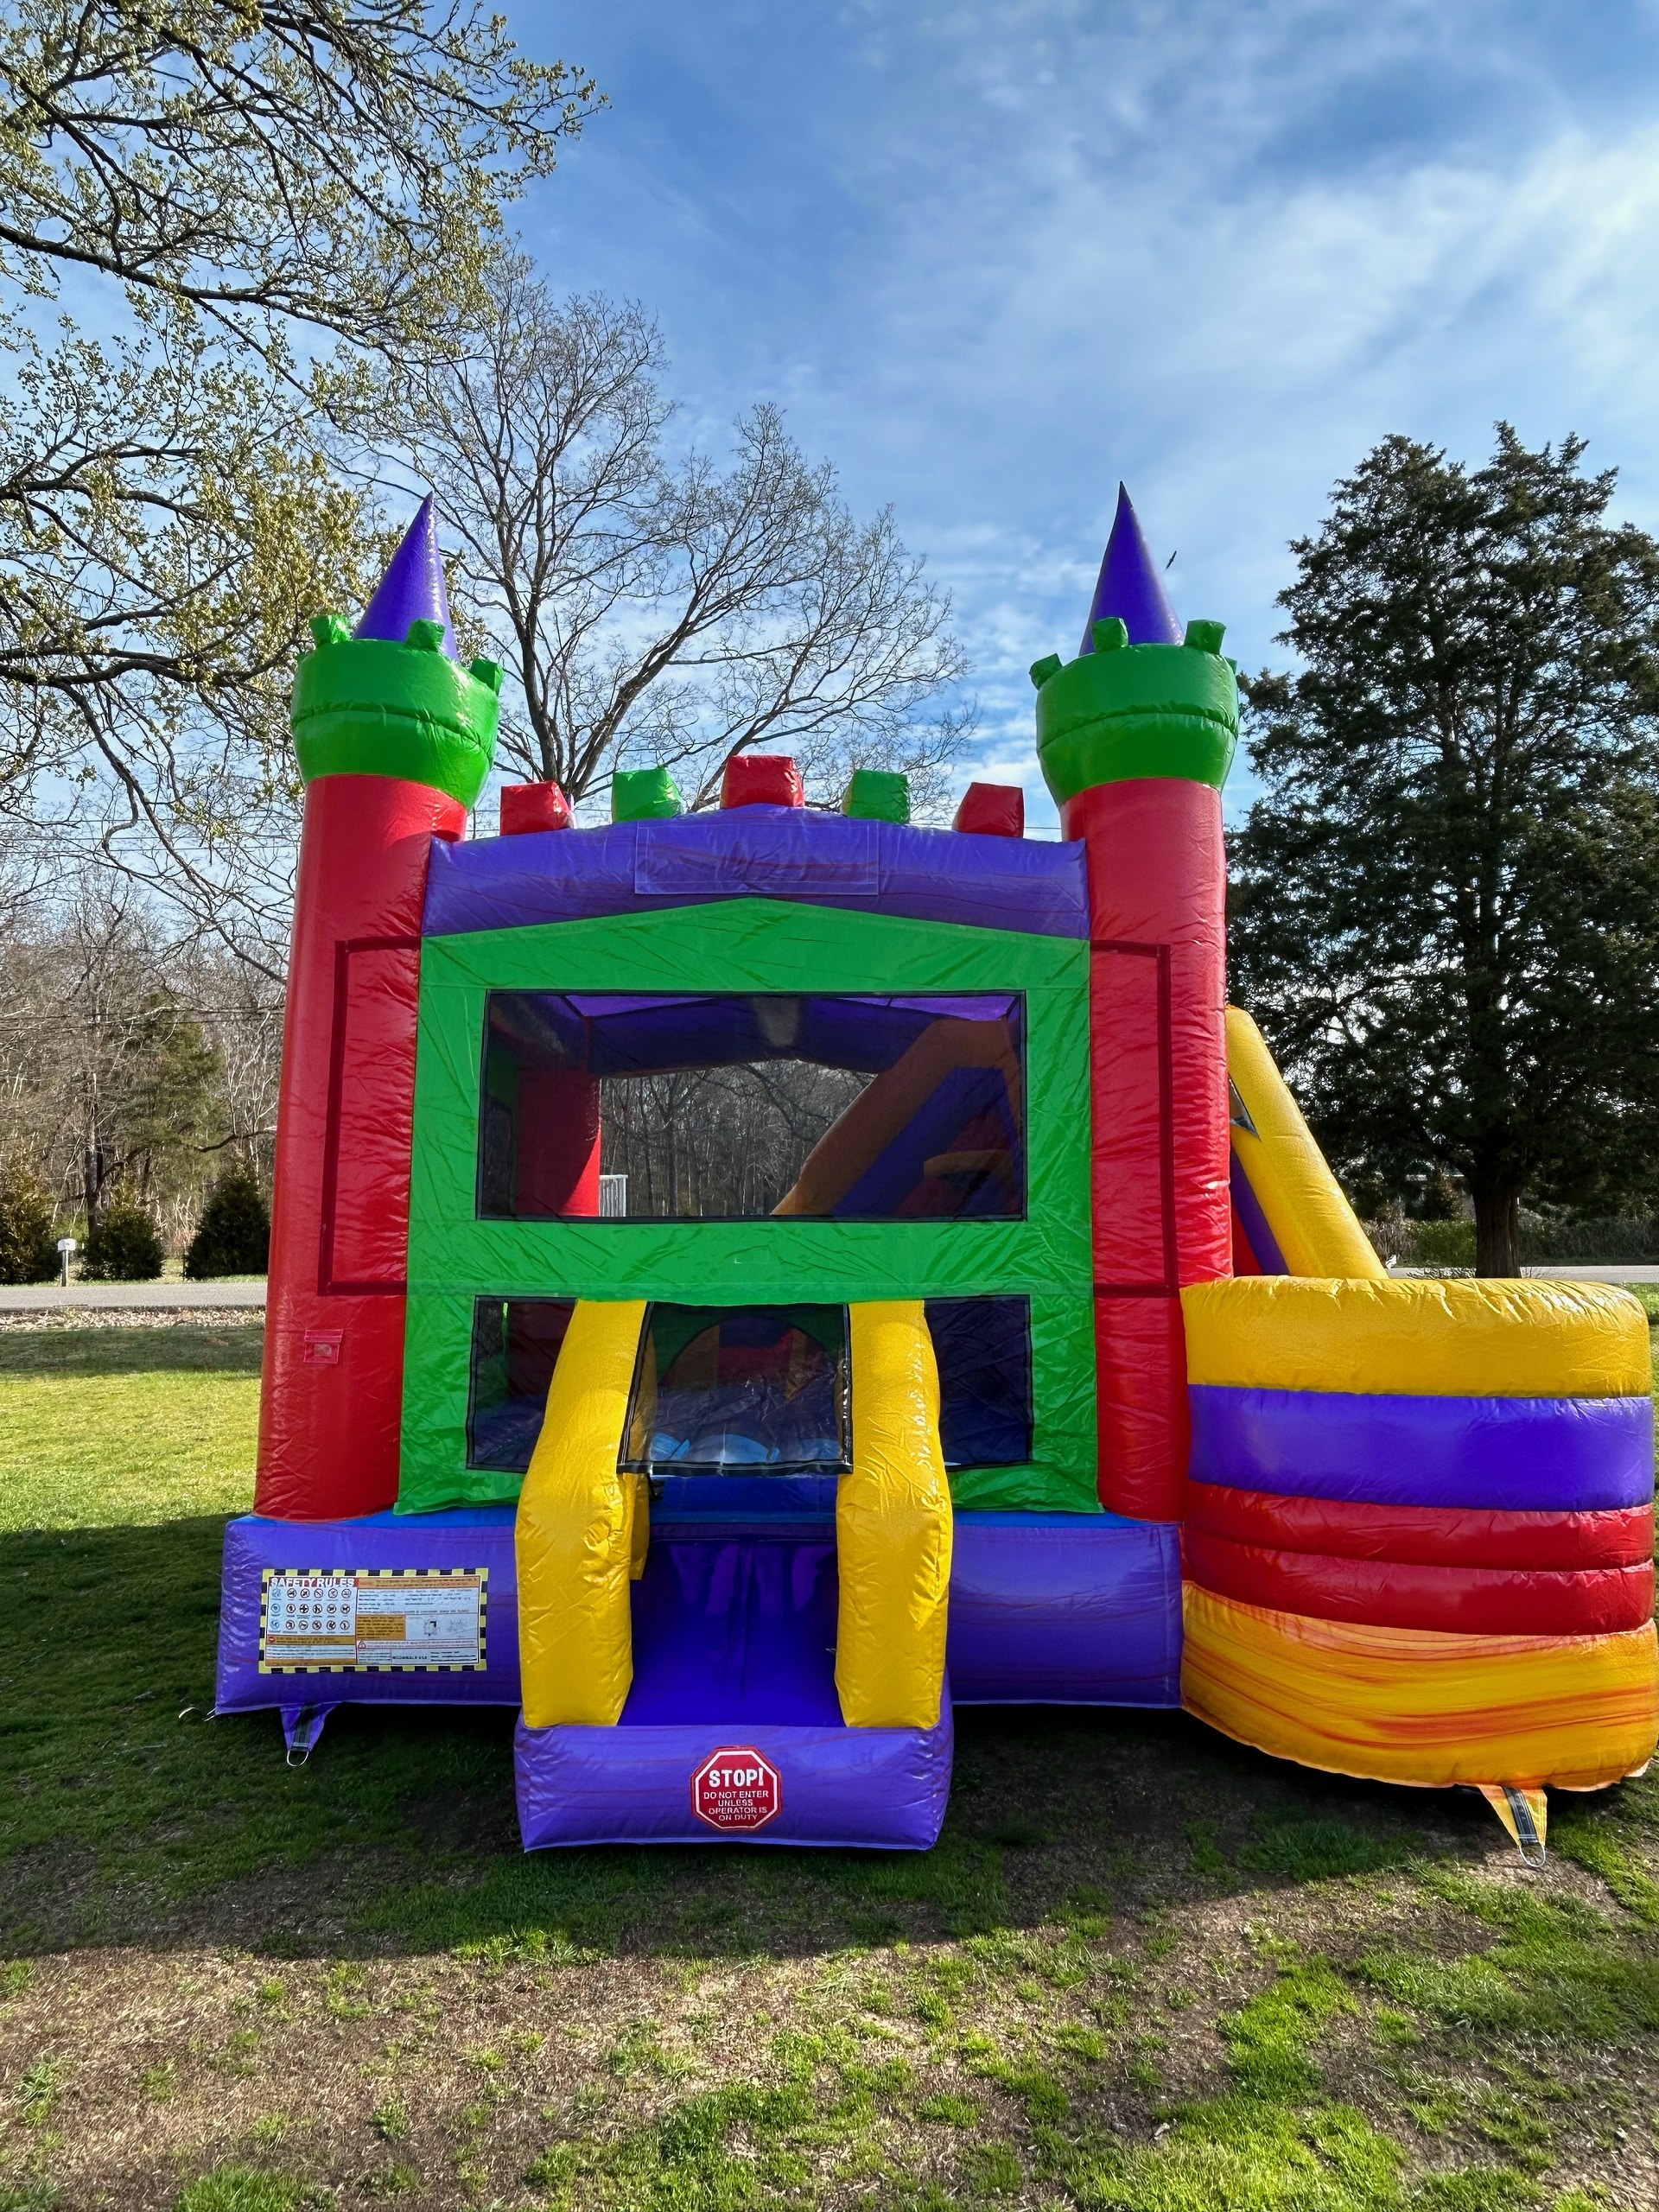 Bounce House Rental Services